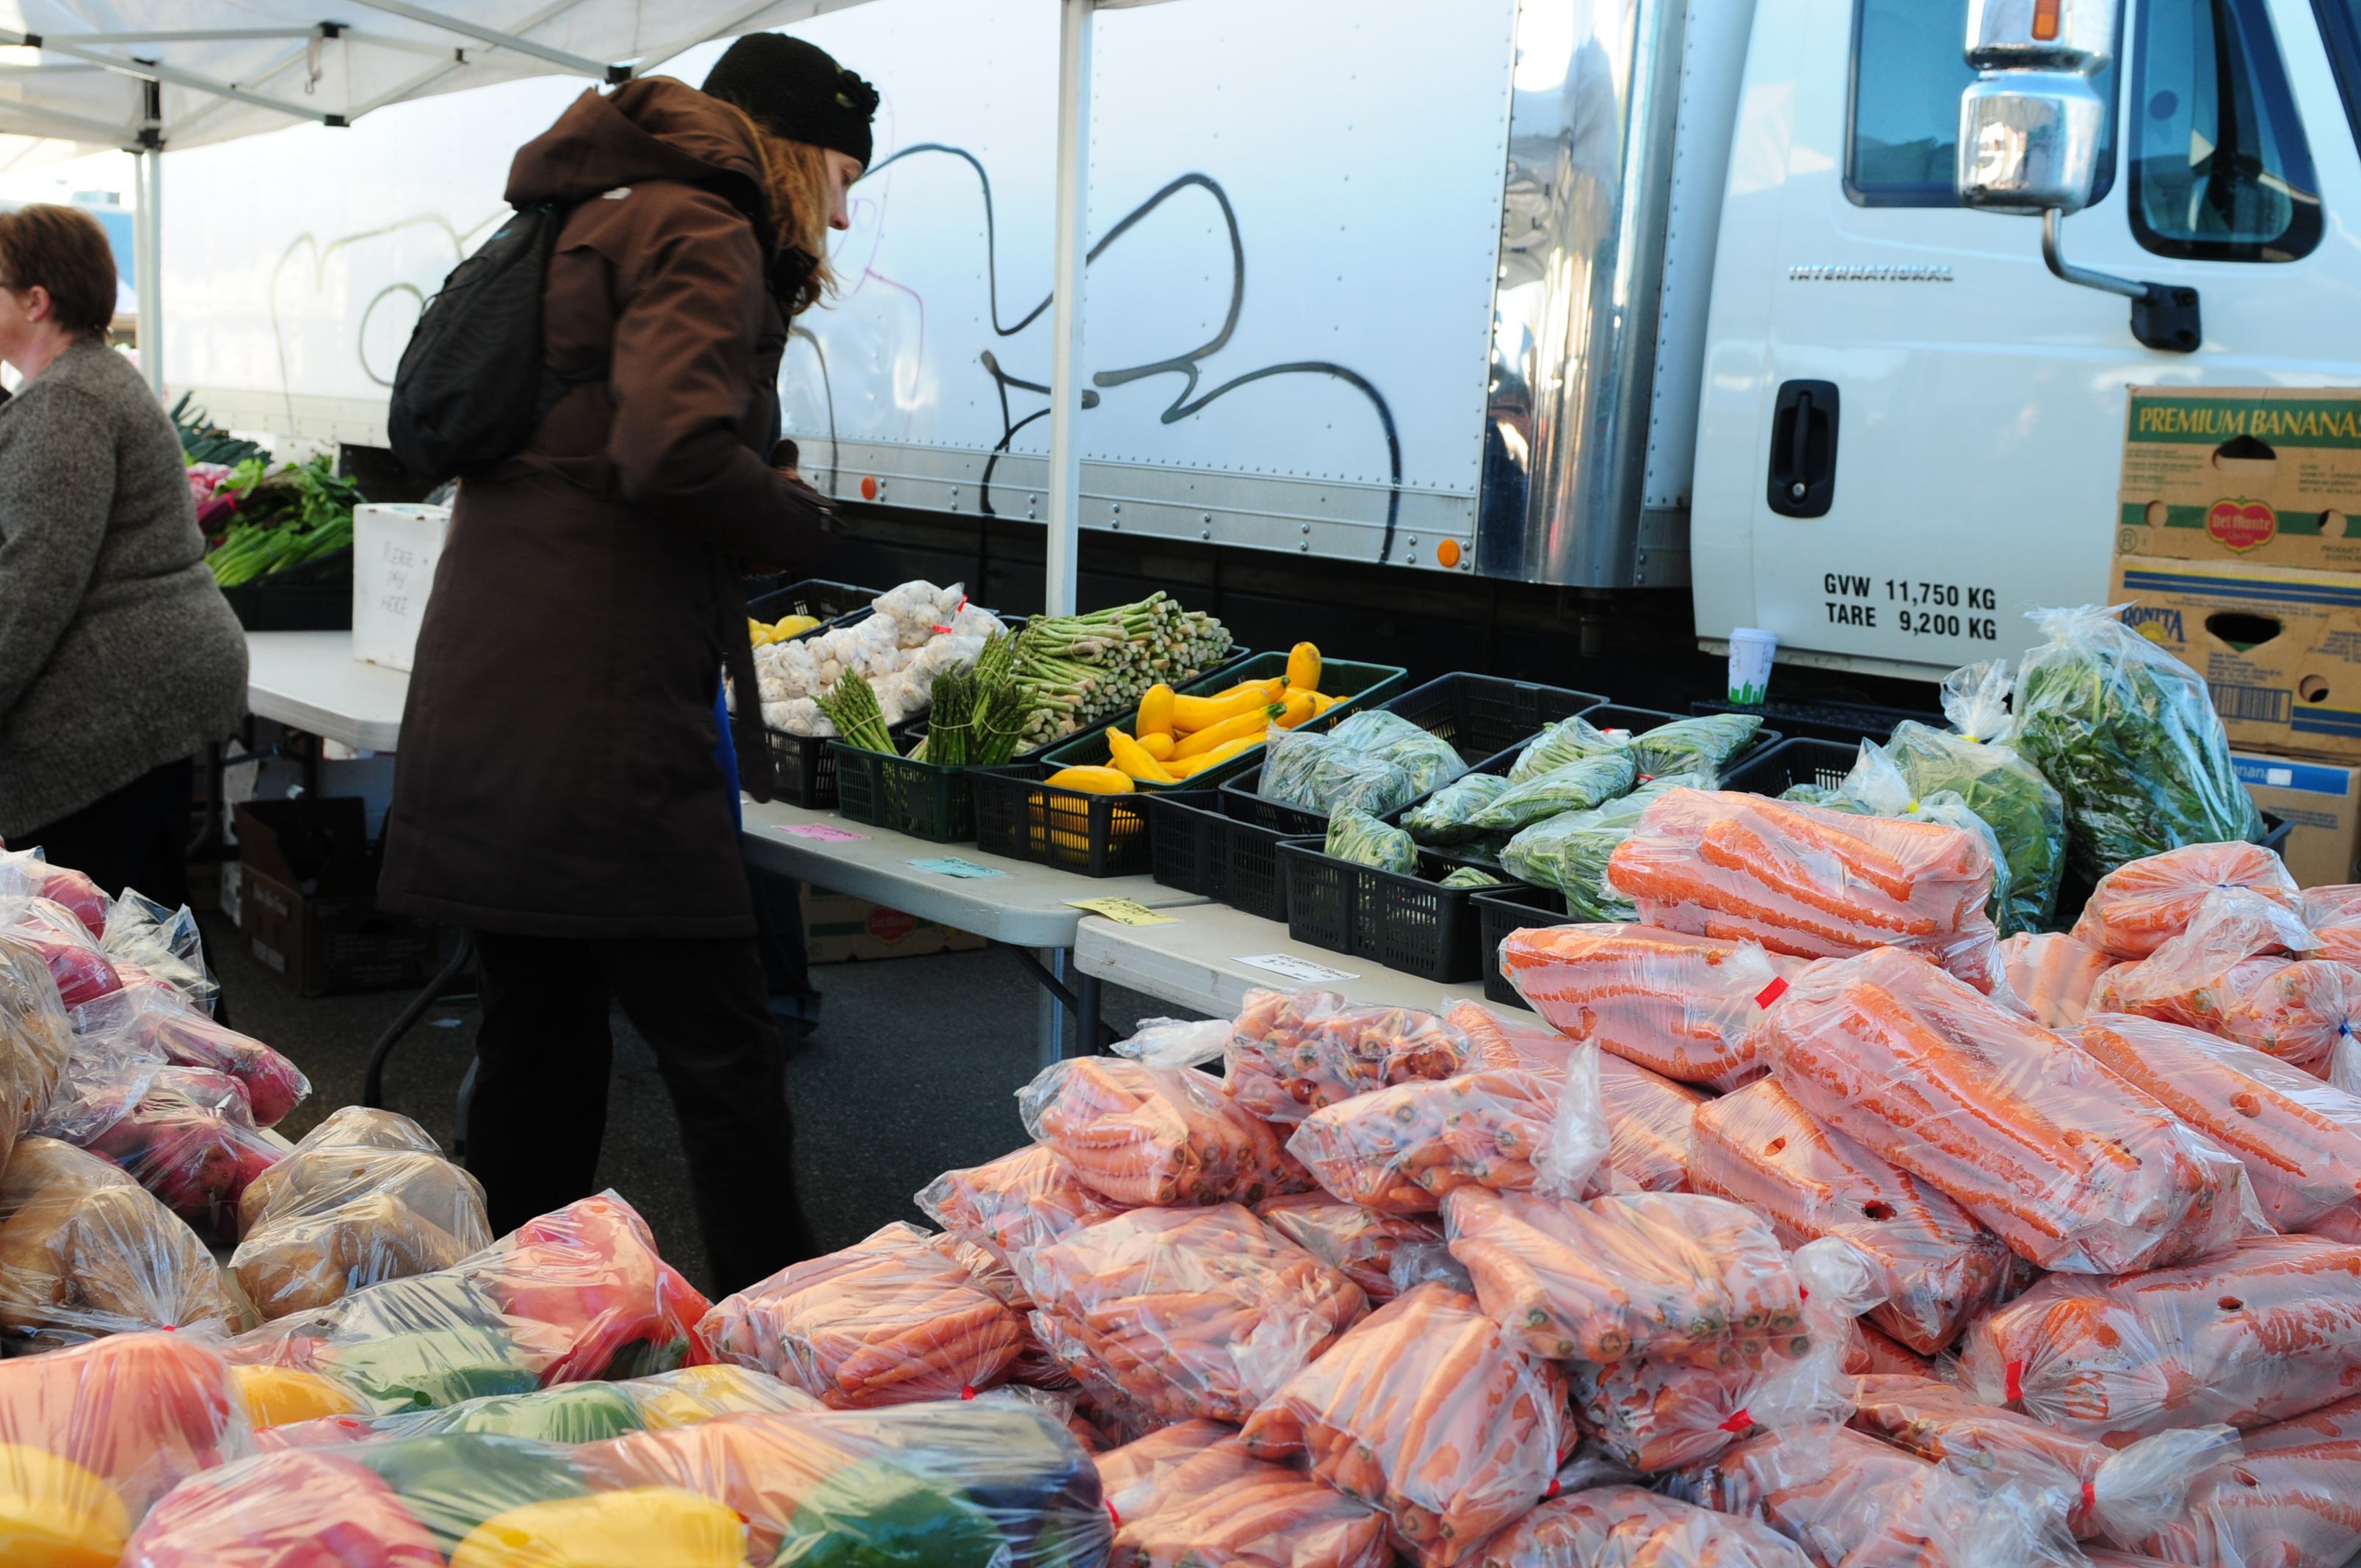 THE LAST ONE- Red Deerians flocked to the last Red Deer Market this past weekend downtown to get their fresh produce.